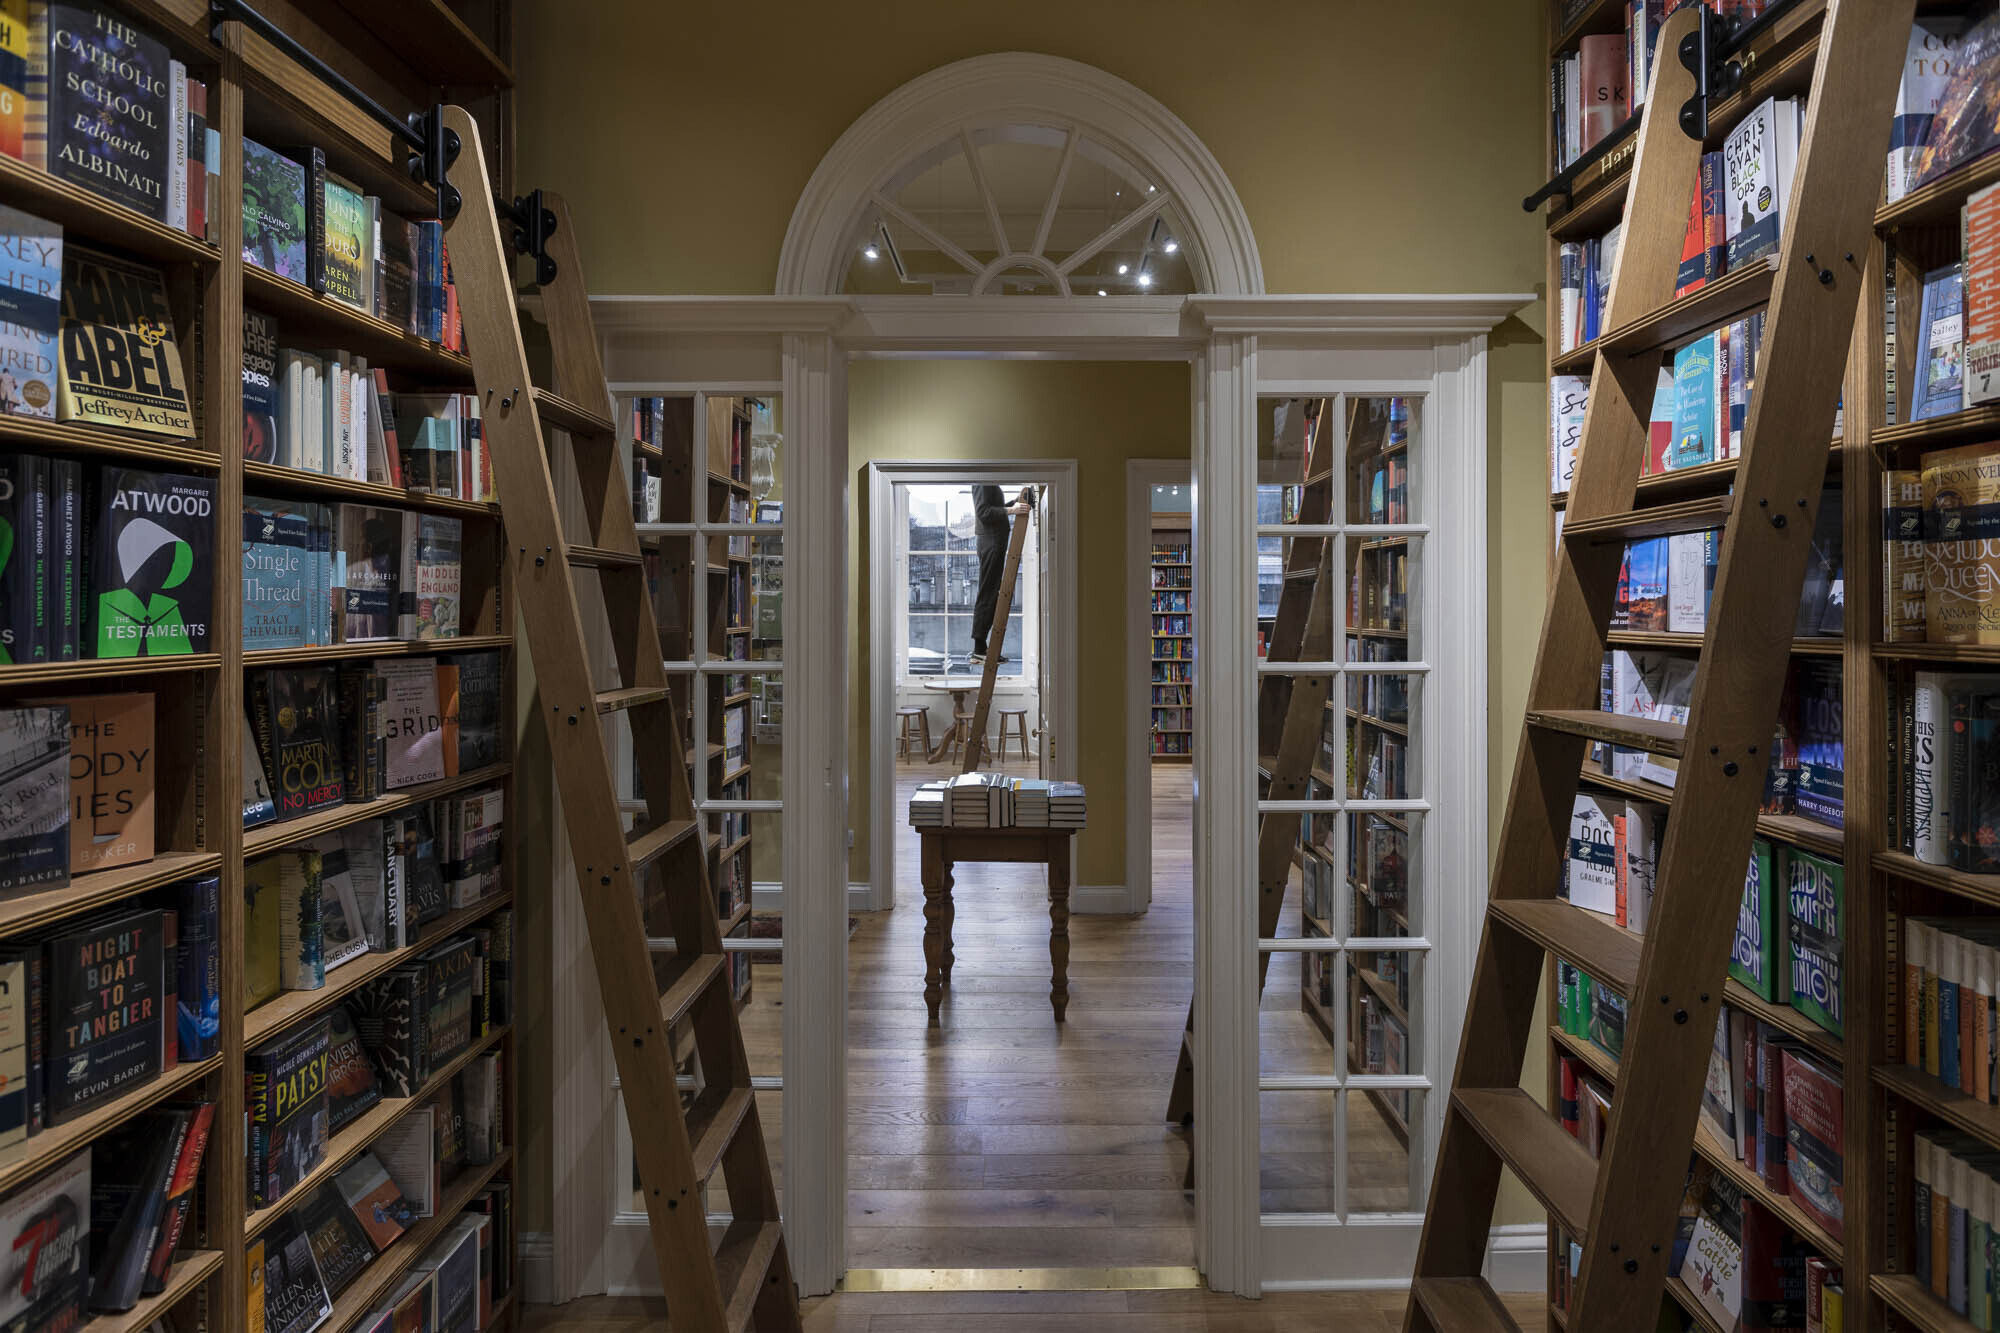 Library ladders to reach high shelves in the Topping and Company bookshop, in Edinburgh's Georgian New Town. A doorway with a fan light leads through to further booklined rooms, and a member of staff climbs a ladder.